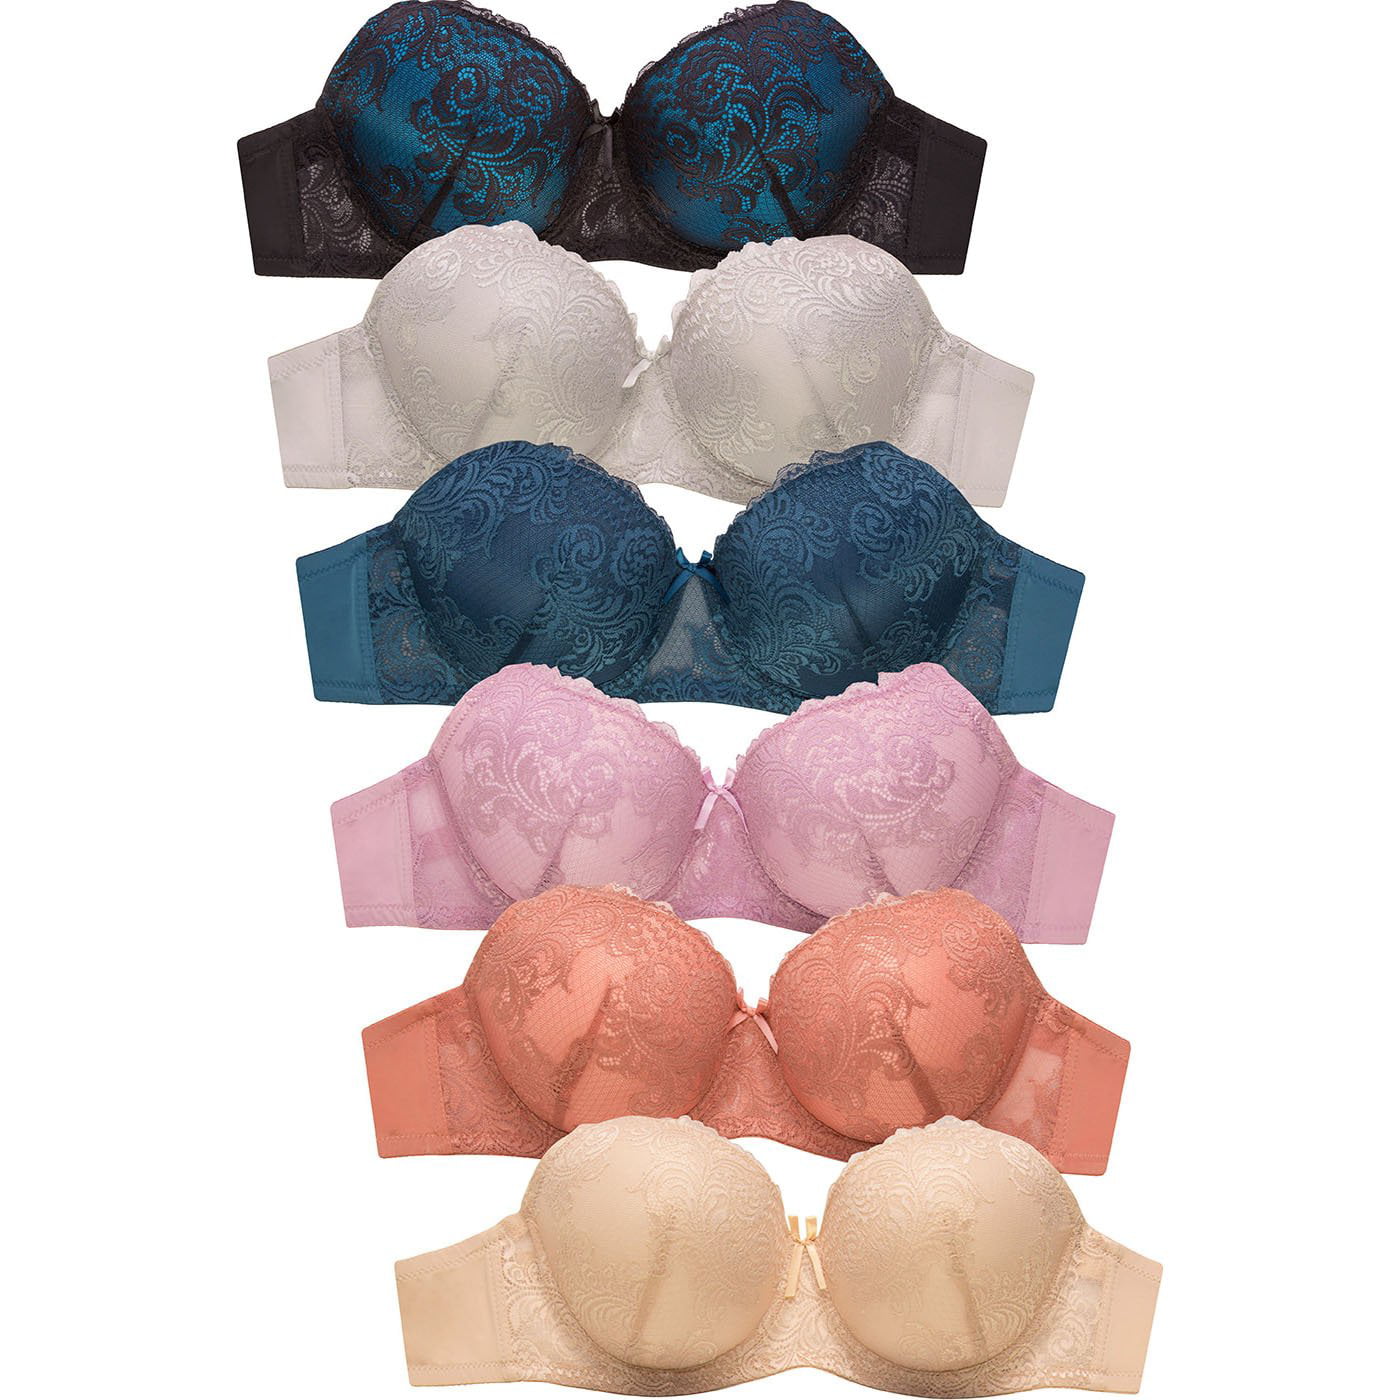 Dailywear Womens 6 Pack Of Everyday Plain Lace D Dd Ddd Cup Bra Various Style 4358ld